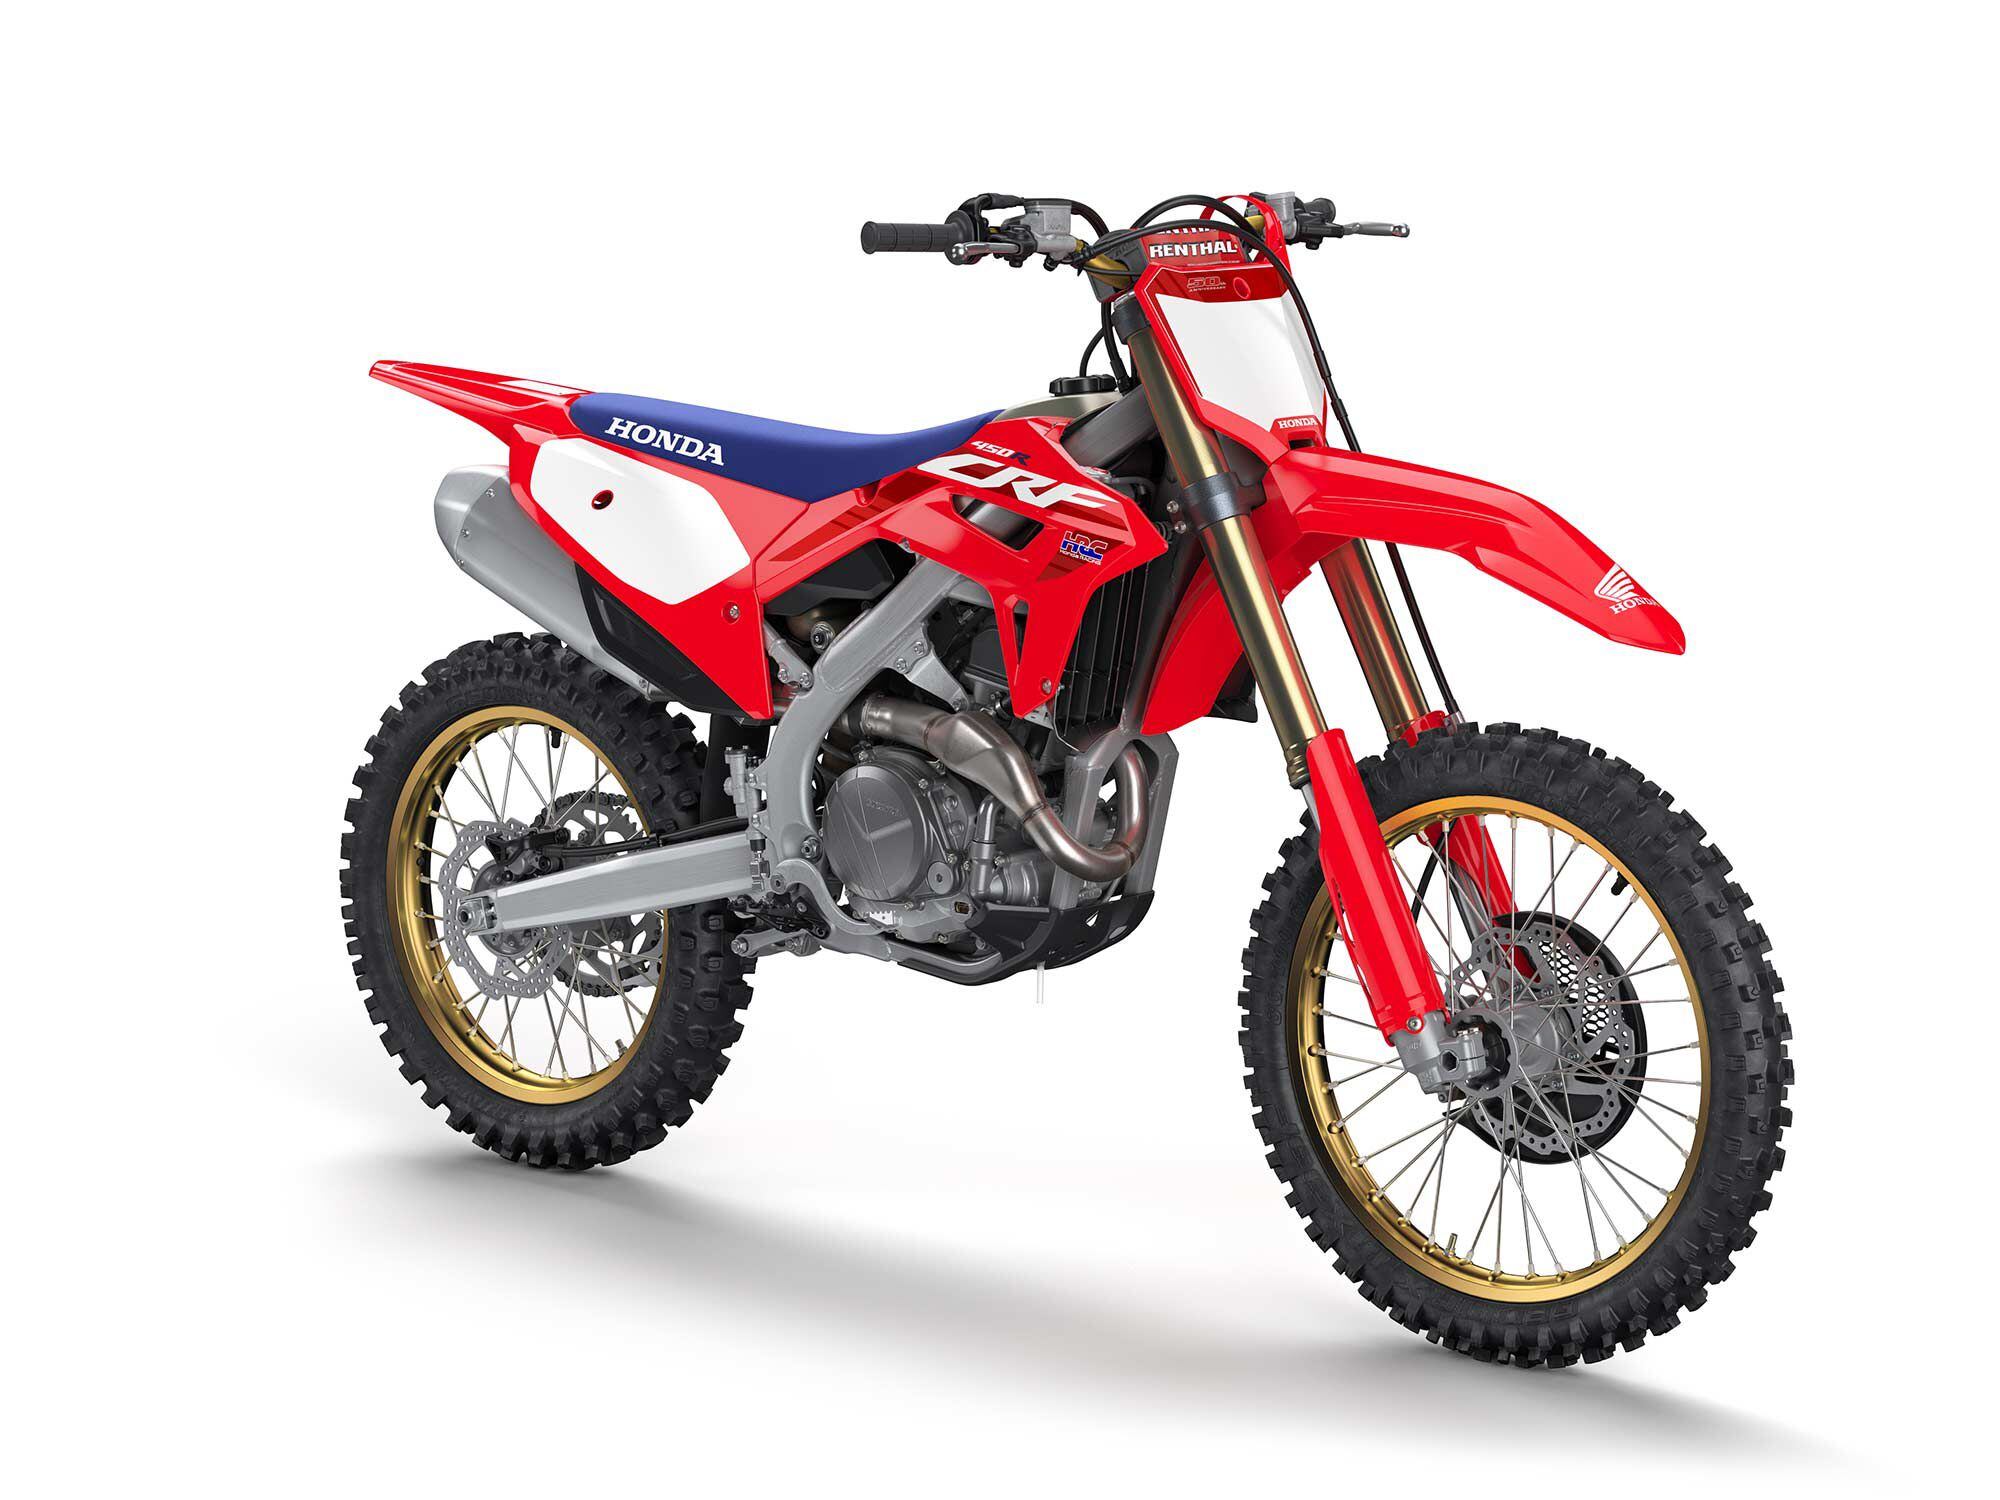 The 2023 CRF450R 50th Anniversary Edition will be priced at $9,899.